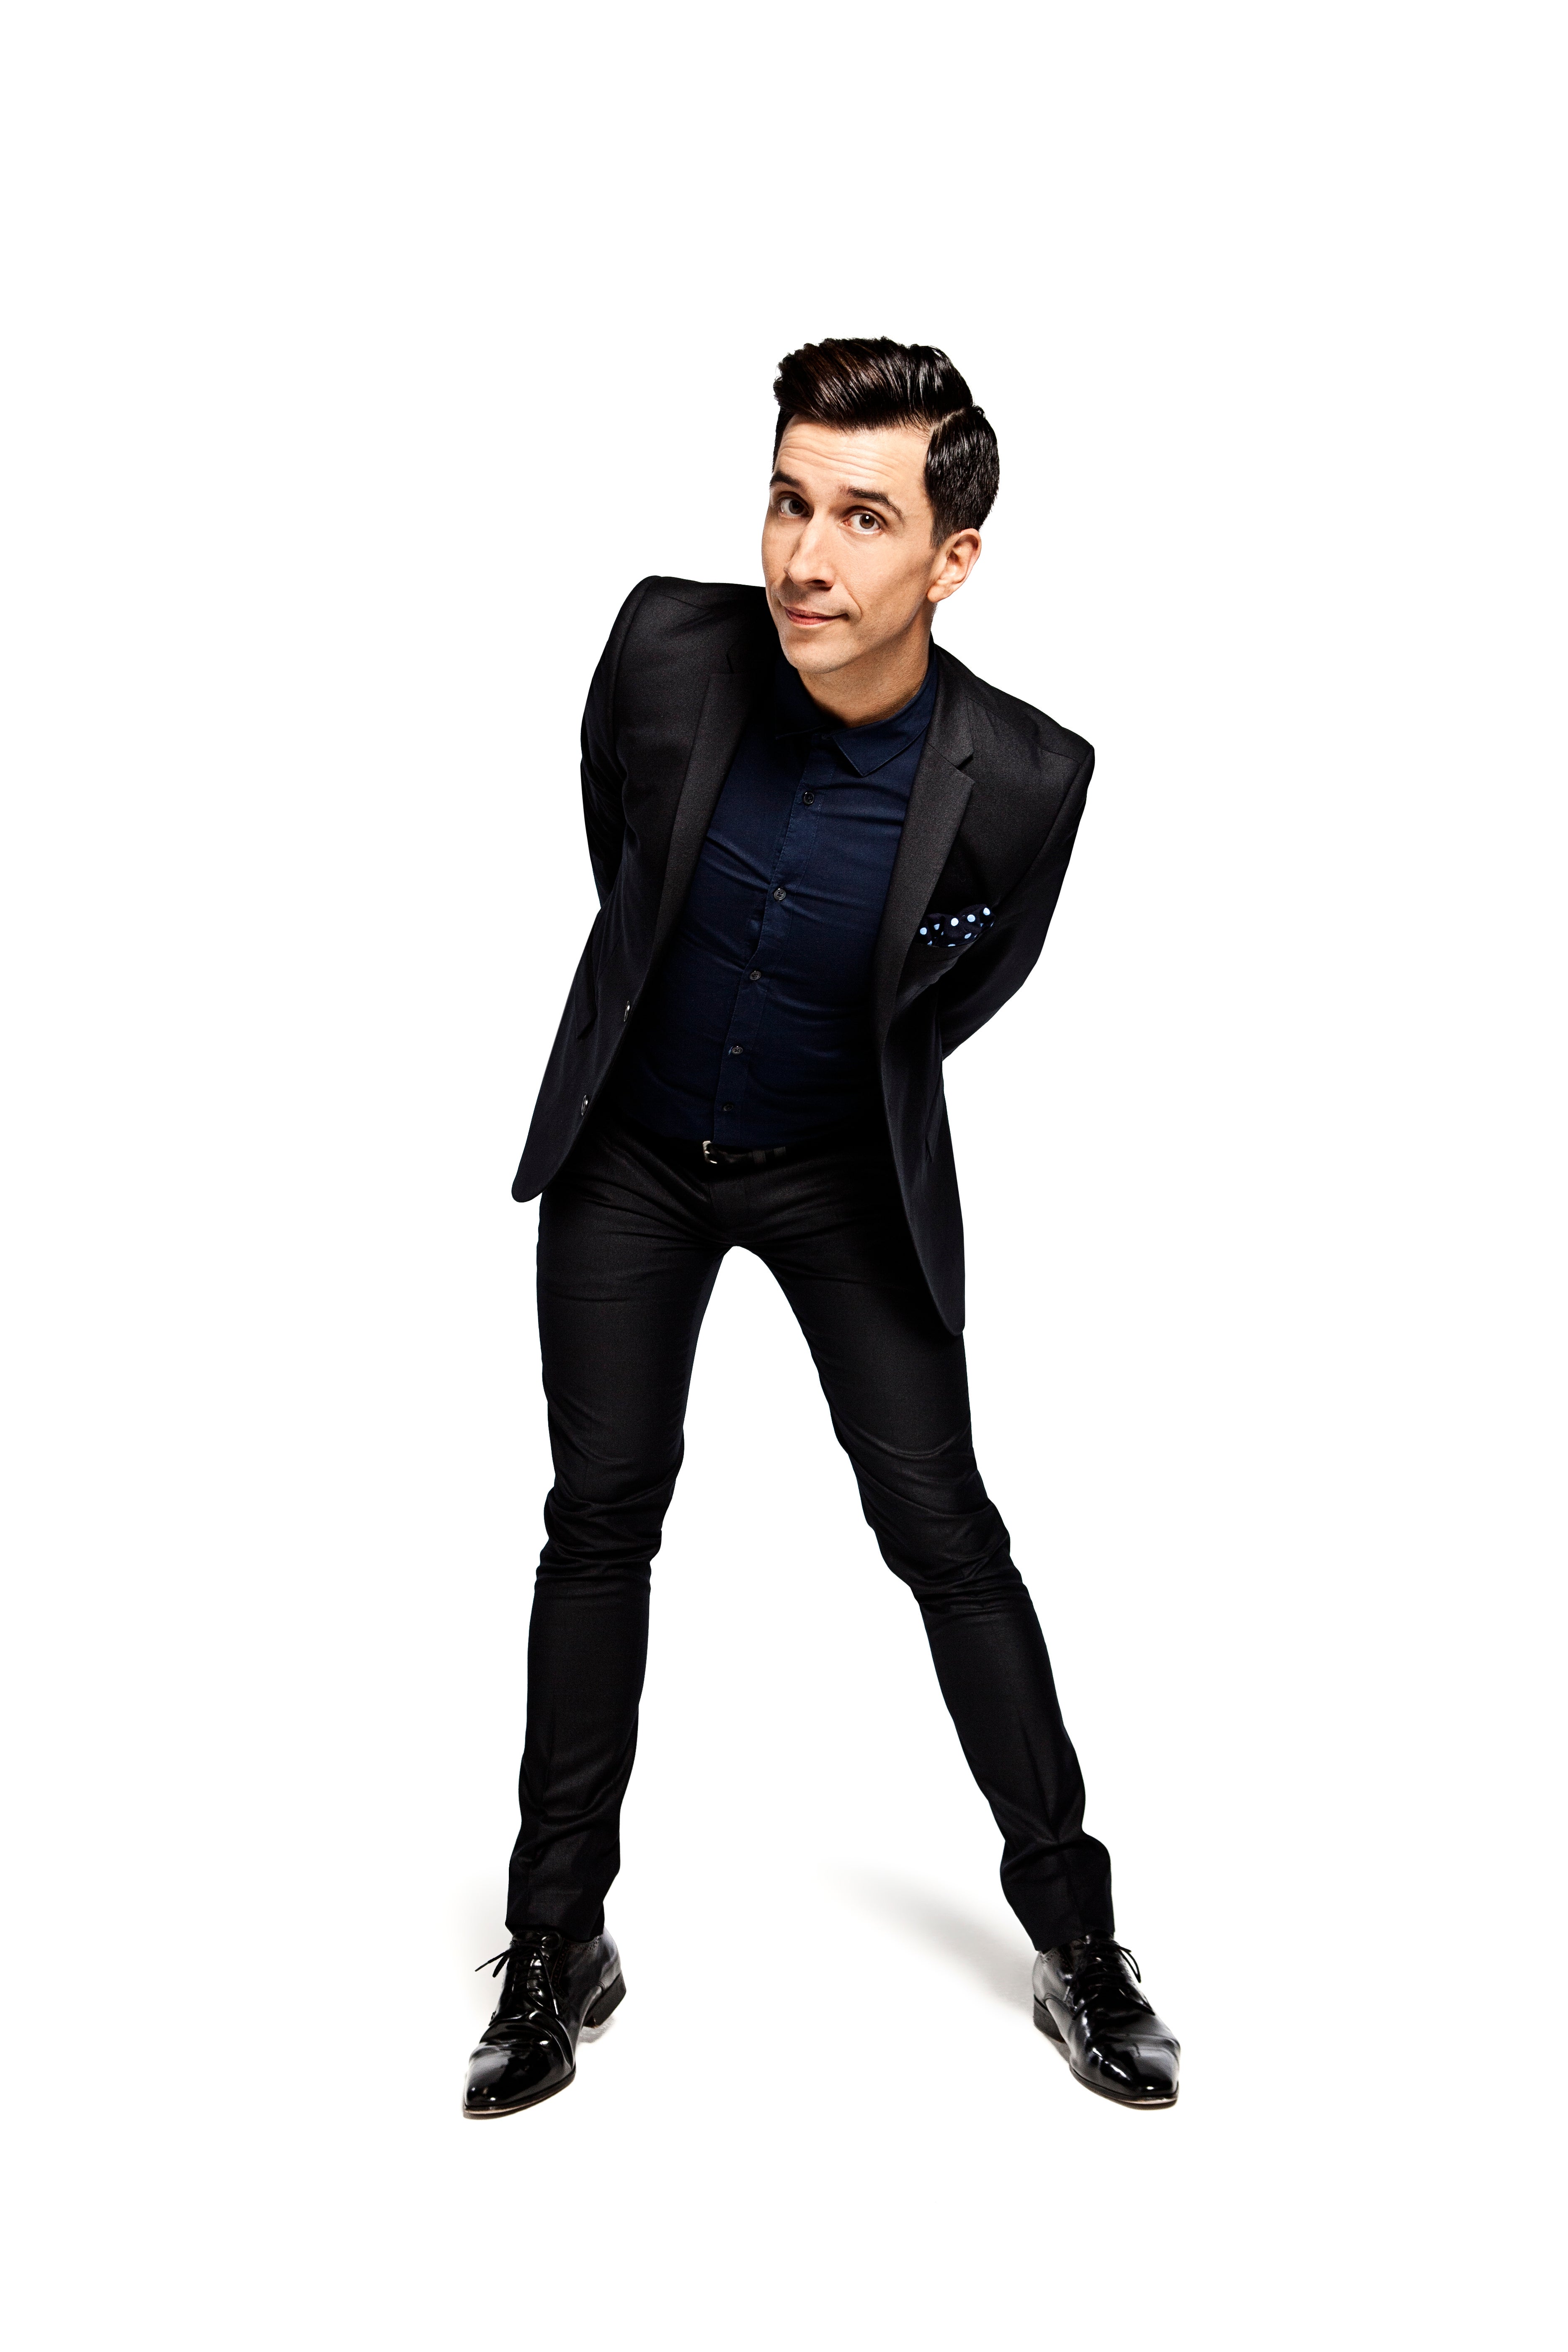 Russell Kane: Hyperactive pre-sale password for genuine tickets in Skegness